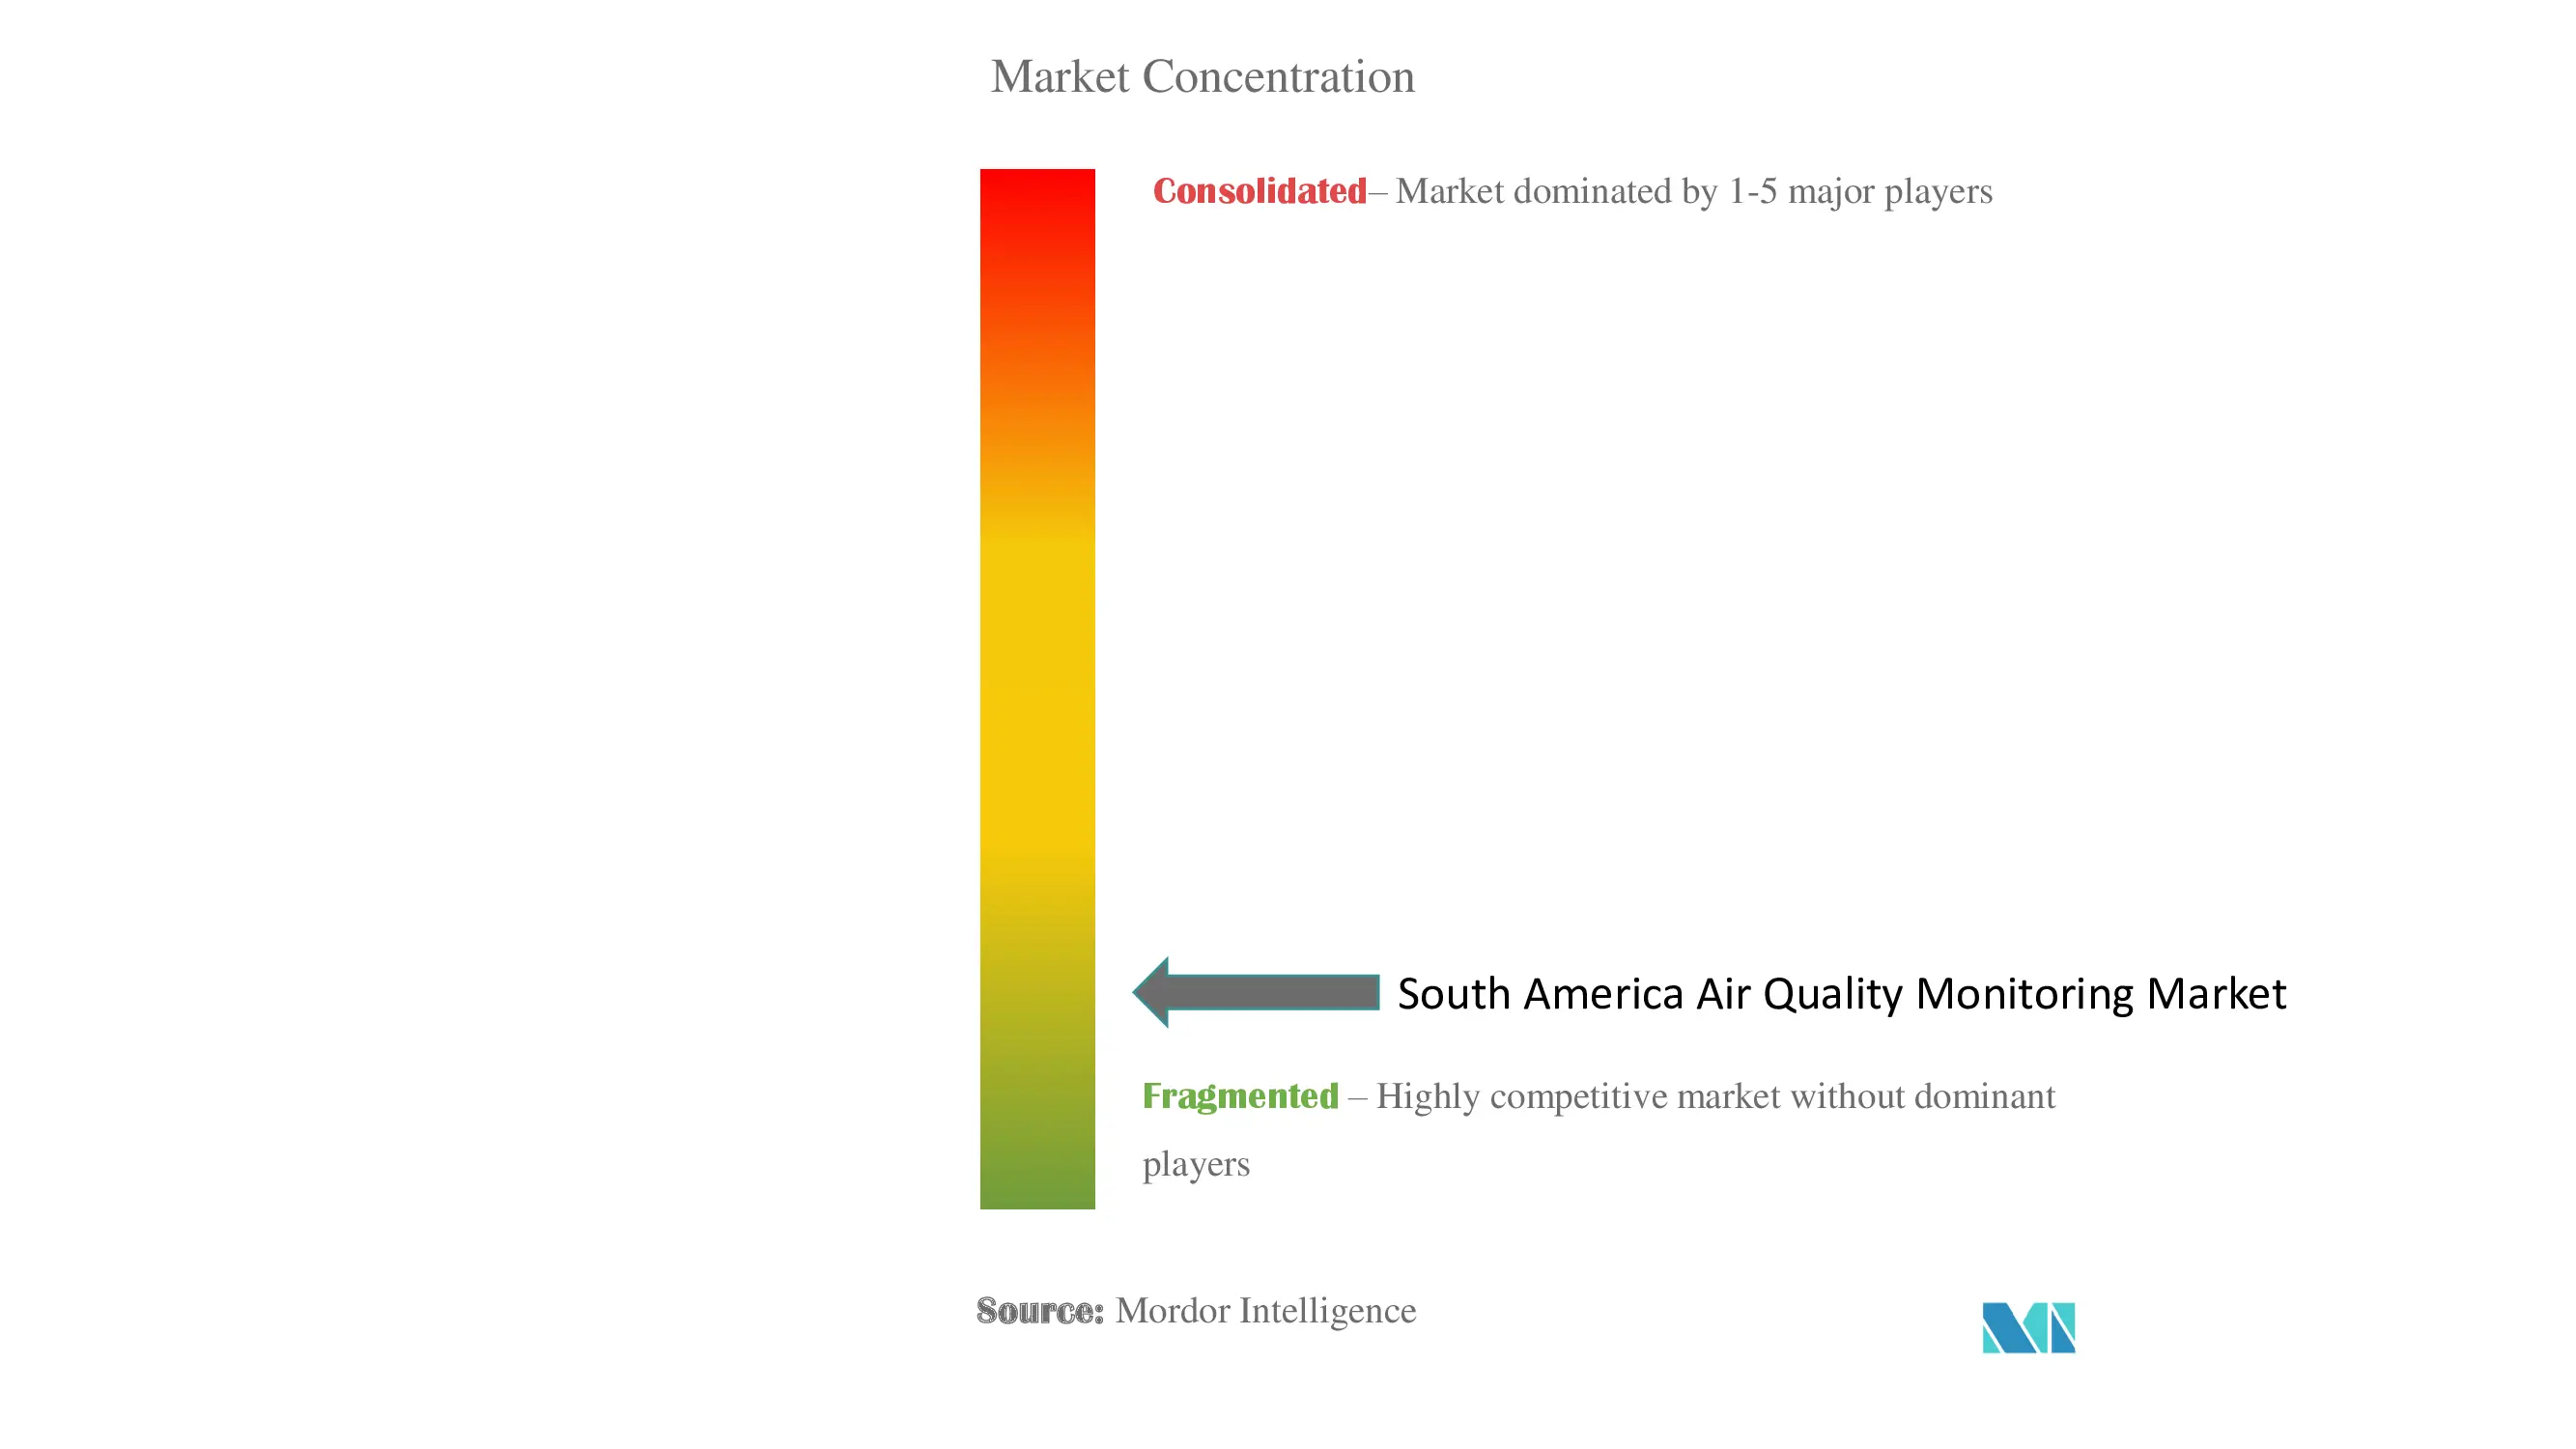 South America Air Quality Monitoring Market Concentration